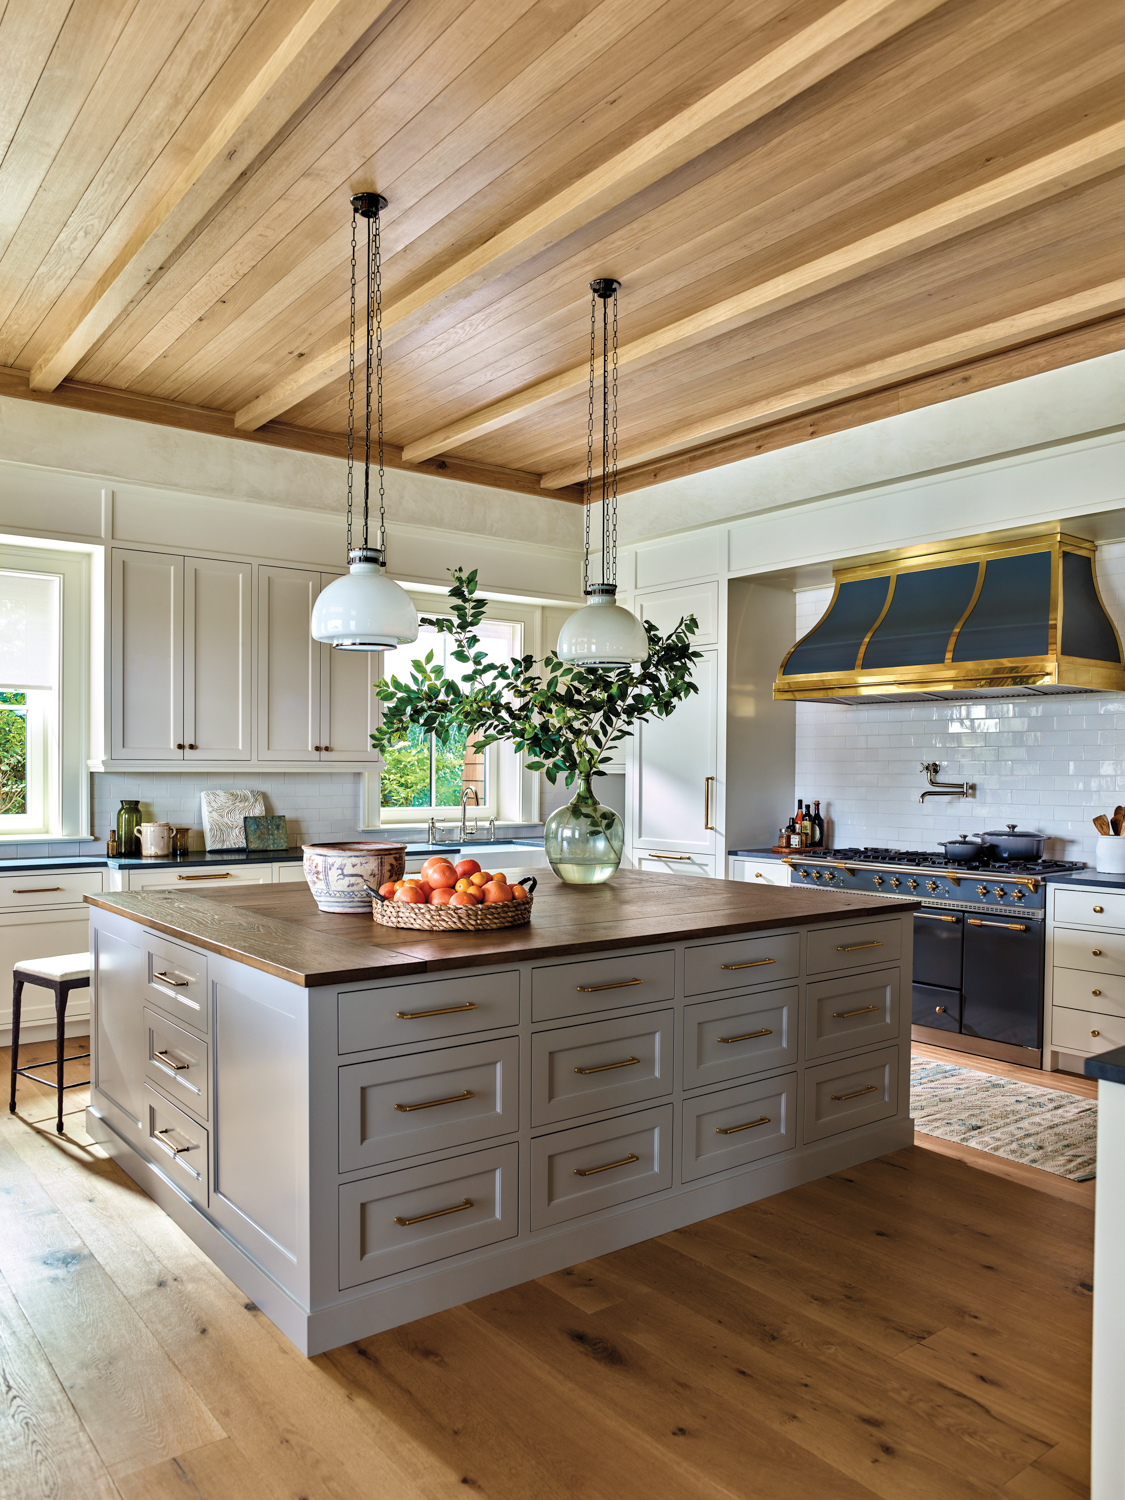 Kitchen with wood ceiling, large...